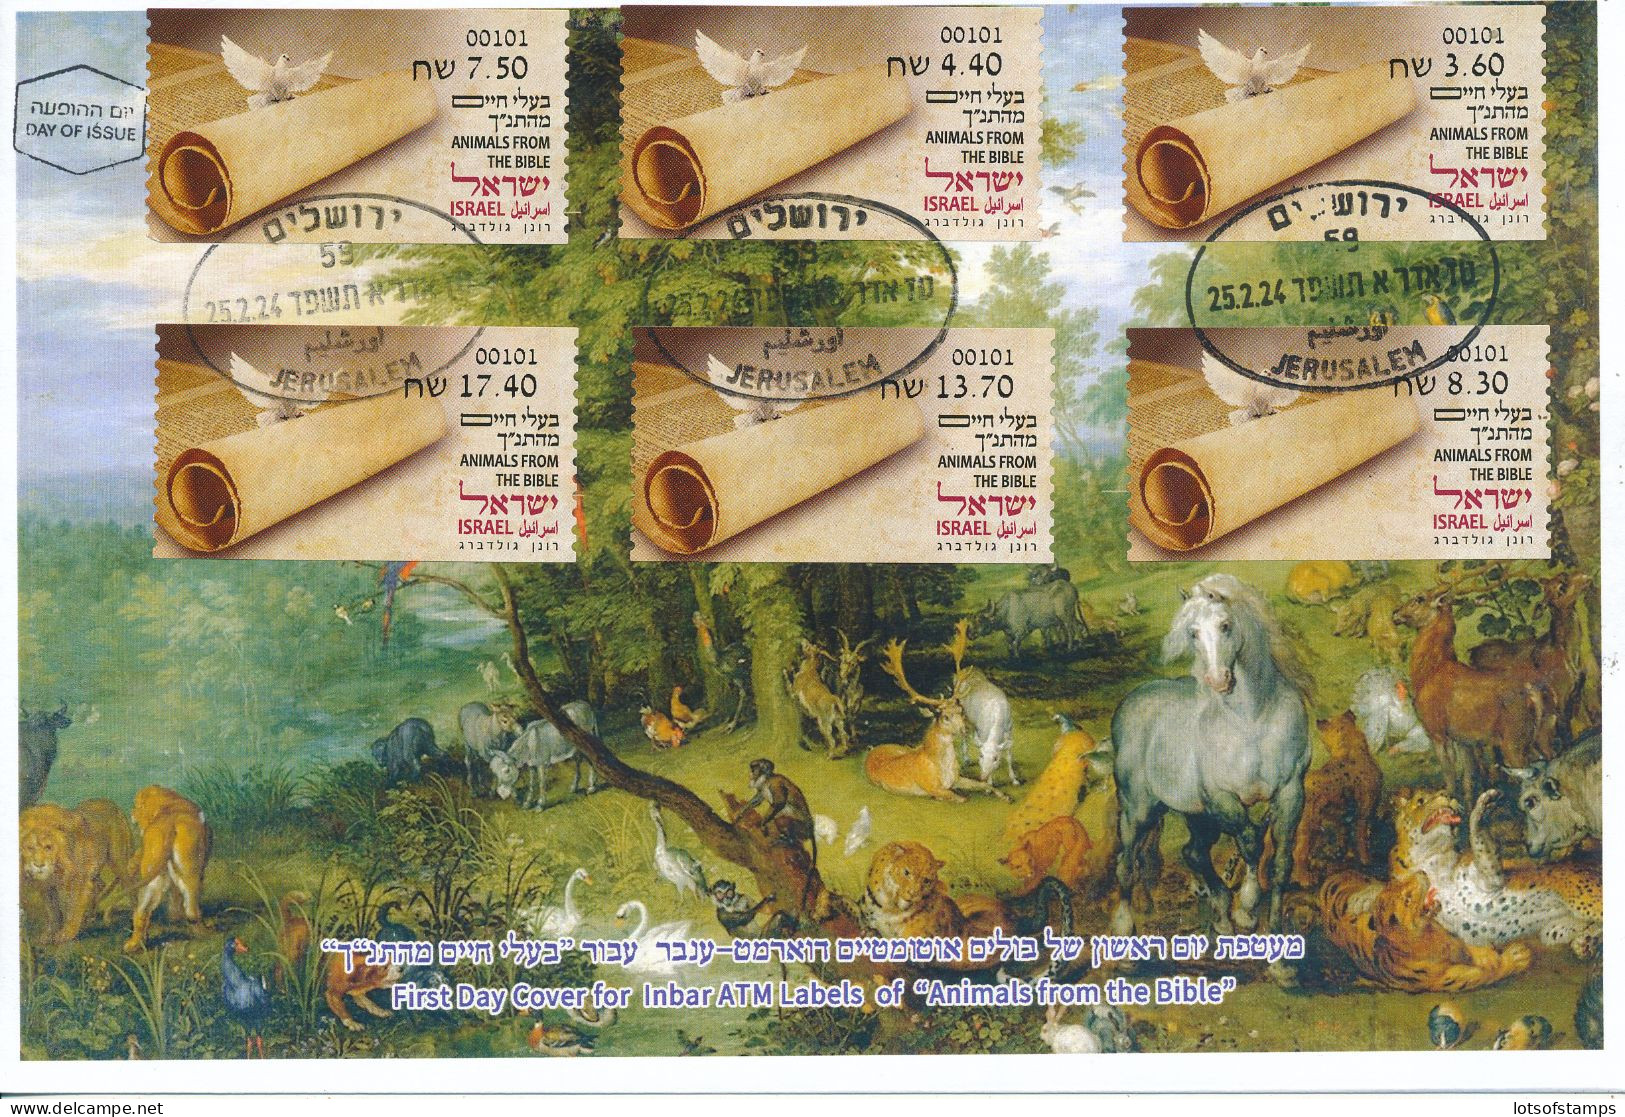 ISRAEL 2024 ANIMALS FROM THE BIBLE ATM LABEL JERUSALEM MACHINE 001 SET FDC - Unused Stamps